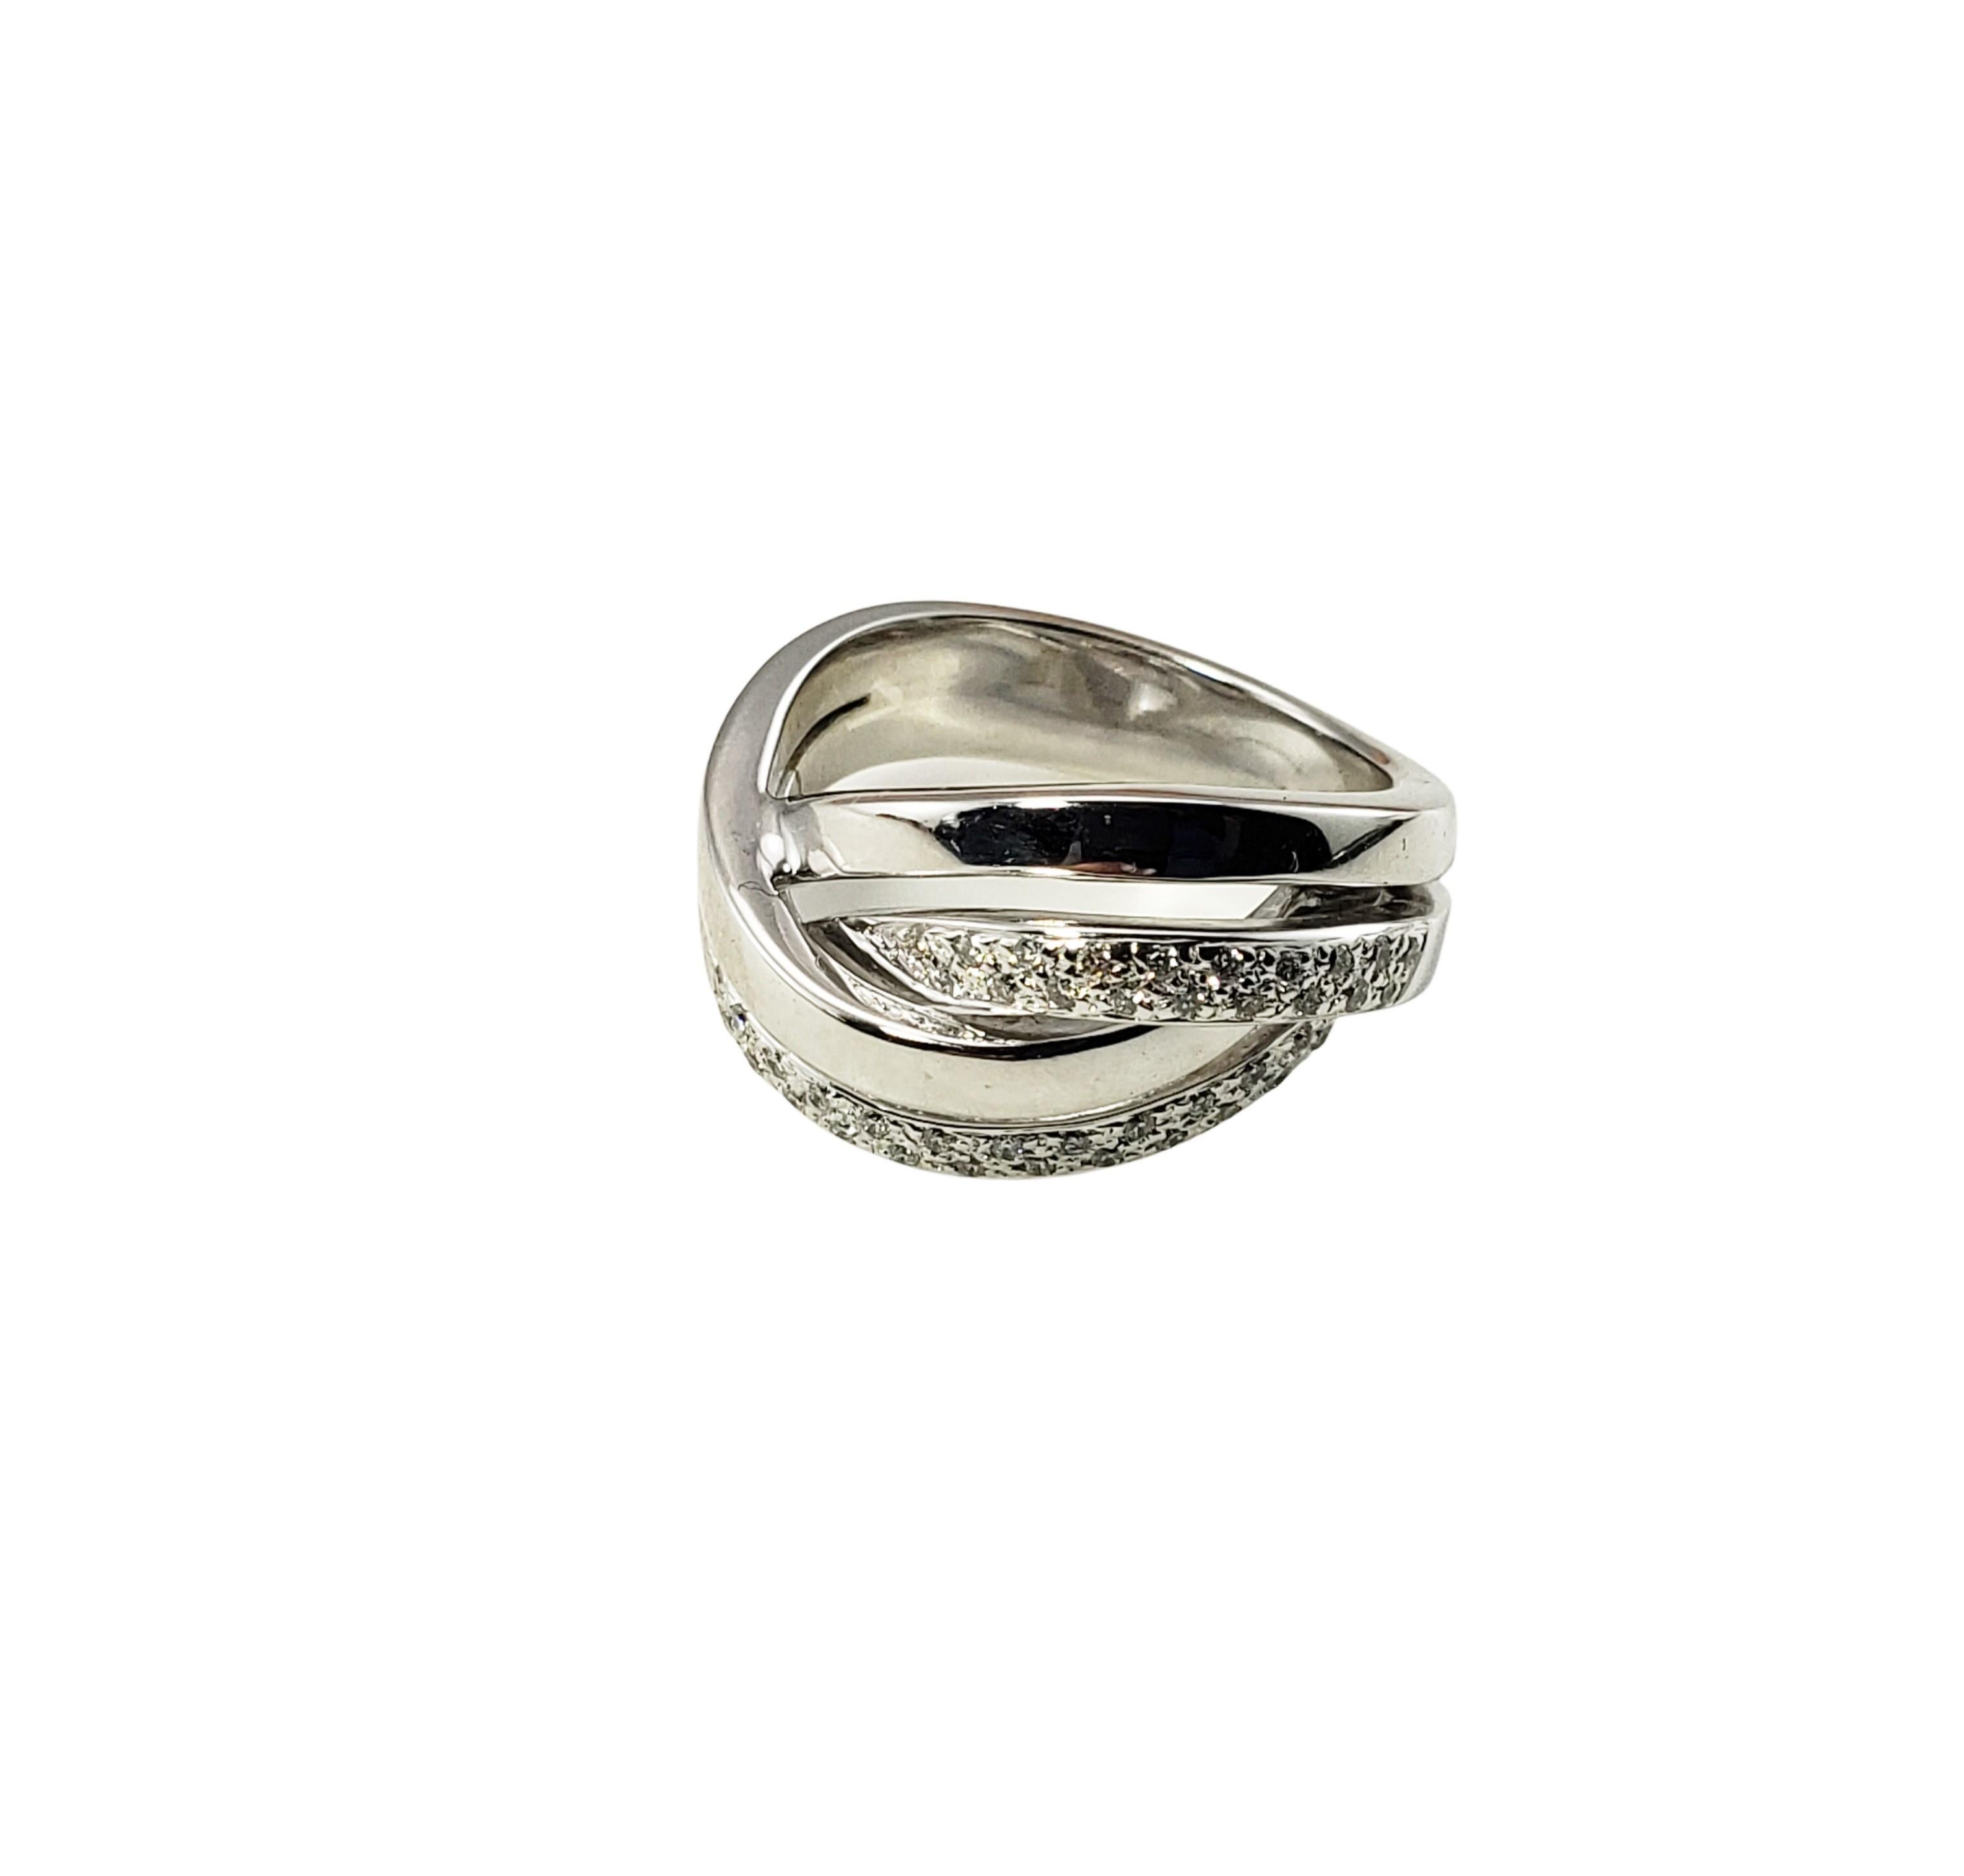 14 Karat White Gold and Diamond Band Ring Size 7-

This sparkling band features 43 round brilliant cut diamonds set in beautifully detailed 14K white gold.  Width:  12 mm.  Shank:  5 mm.

Approximate total diamond weight:  .25 ct.

Diamond color: